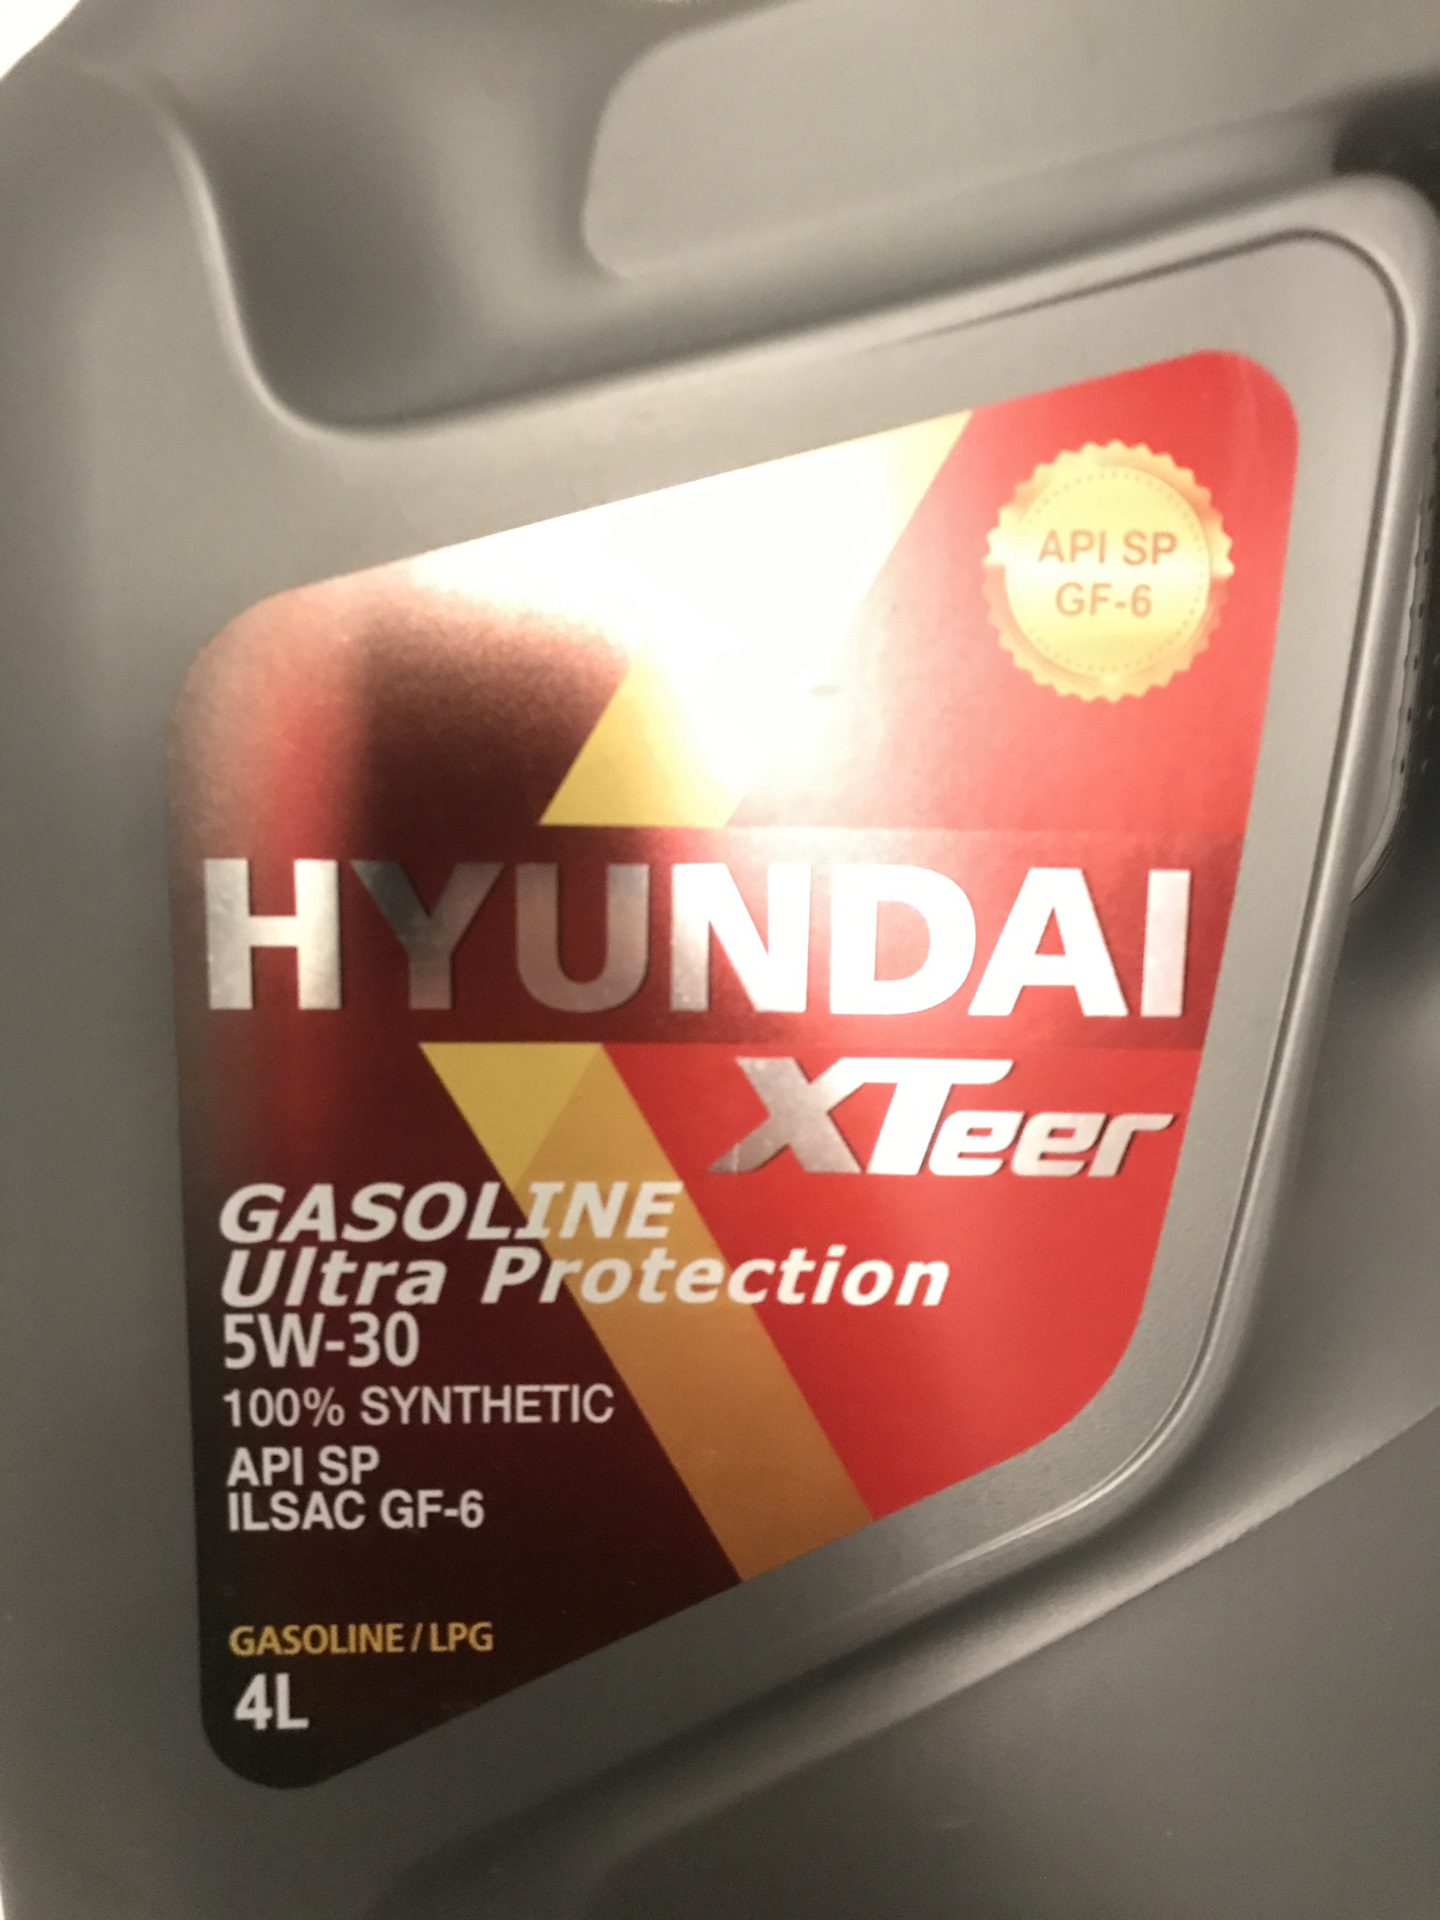 XTEER gasoline Ultra Protection 5w30 200л.